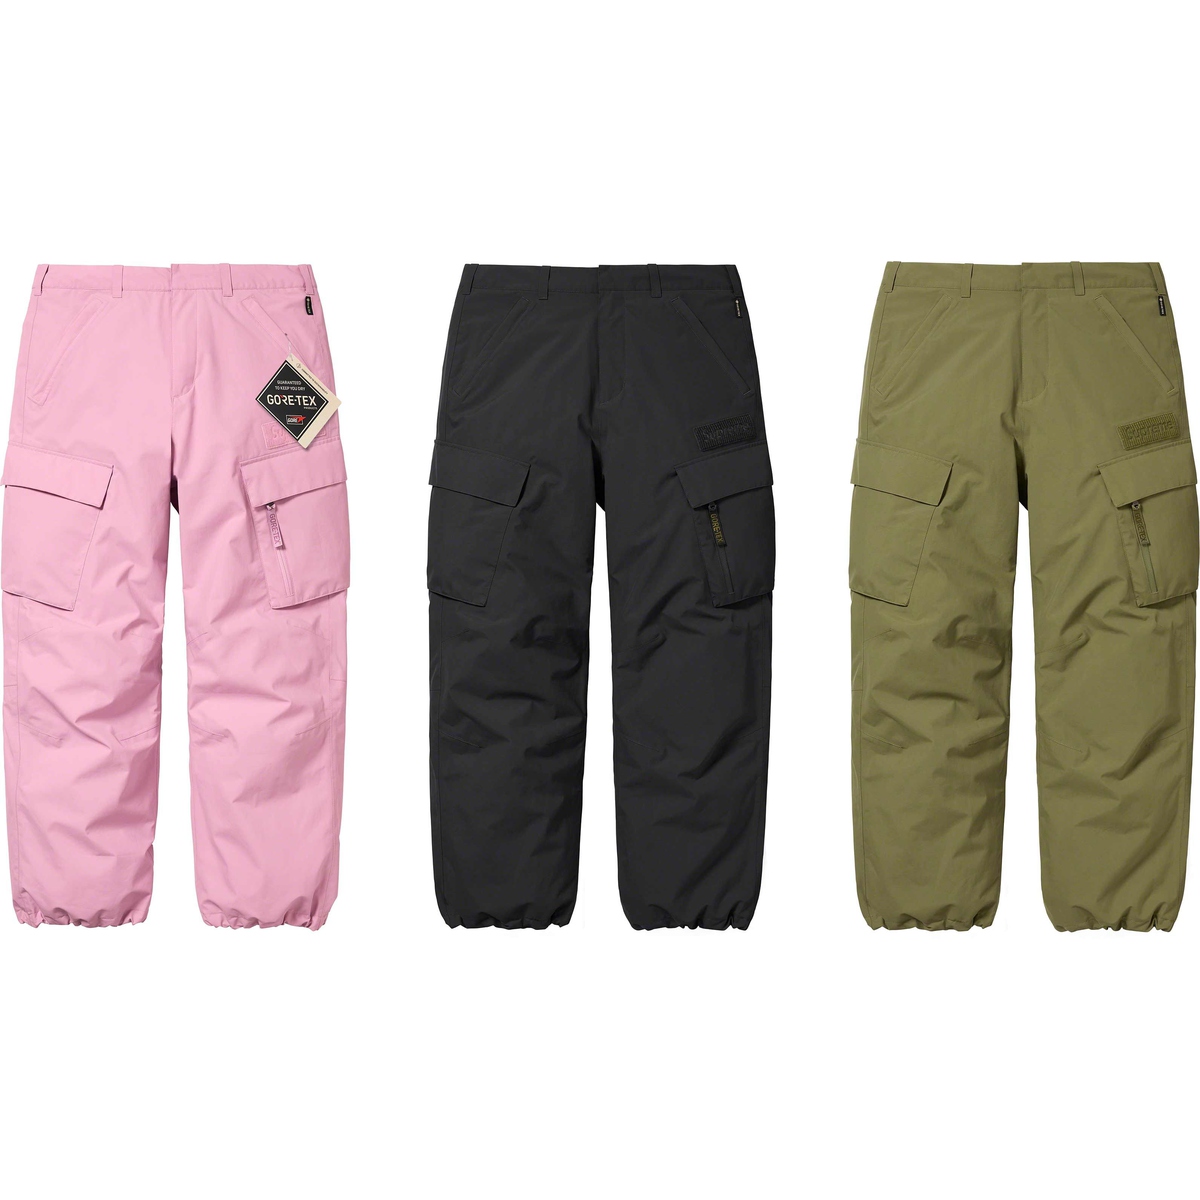 Supreme GORE-TEX Cargo Pant released during fall winter 23 season